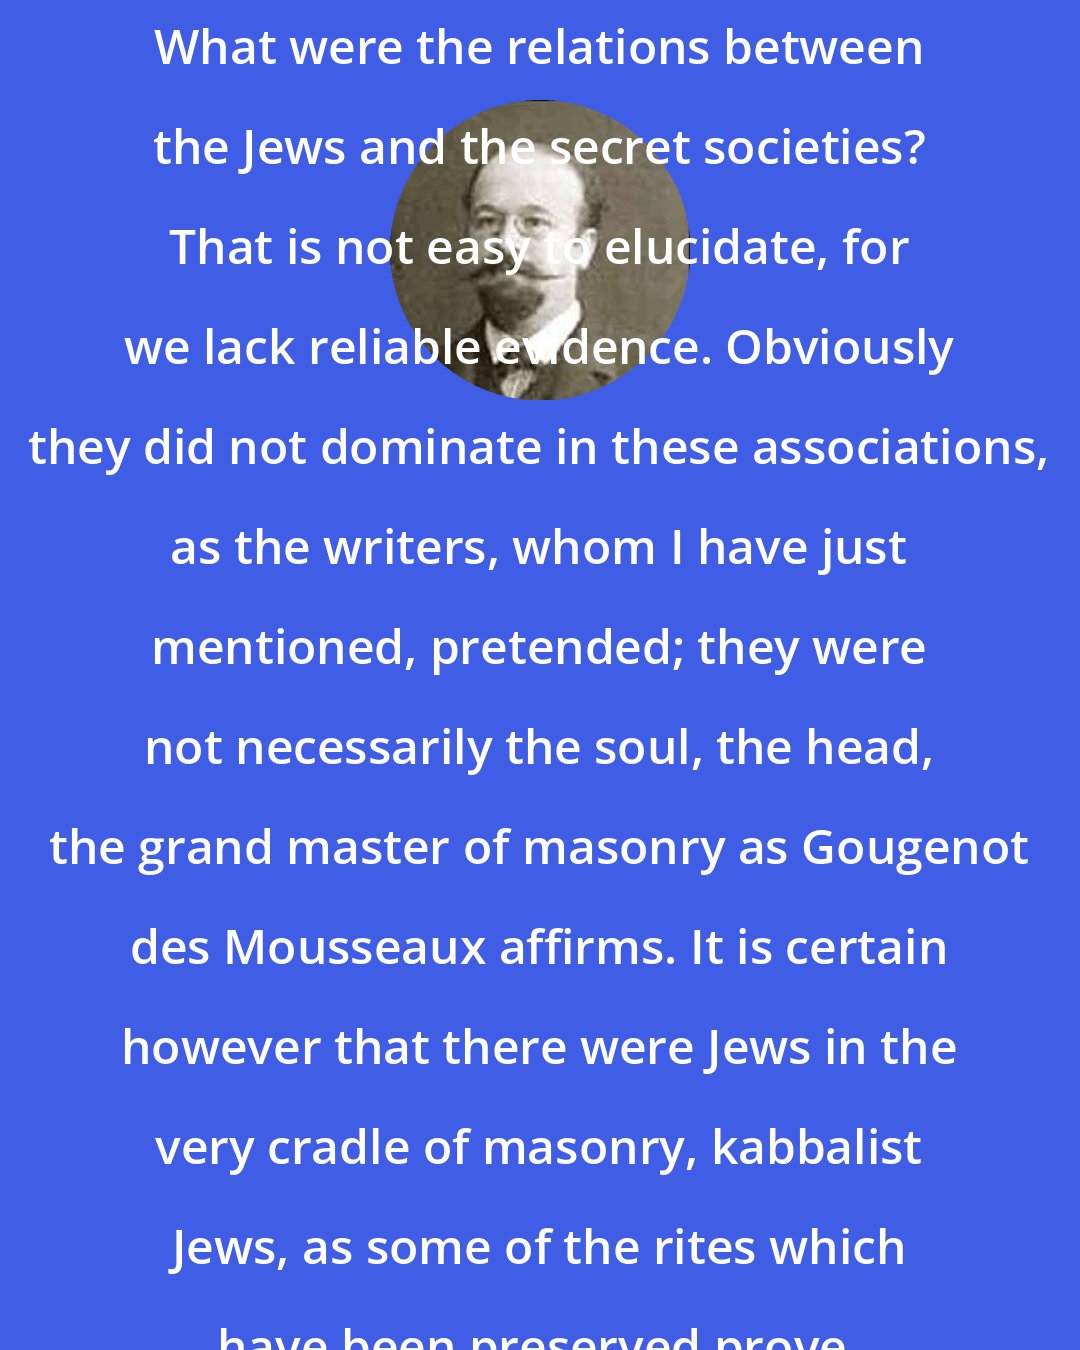 Bernard Lazare: What were the relations between the Jews and the secret societies? That is not easy to elucidate, for we lack reliable evidence. Obviously they did not dominate in these associations, as the writers, whom I have just mentioned, pretended; they were not necessarily the soul, the head, the grand master of masonry as Gougenot des Mousseaux affirms. It is certain however that there were Jews in the very cradle of masonry, kabbalist Jews, as some of the rites which have been preserved prove.